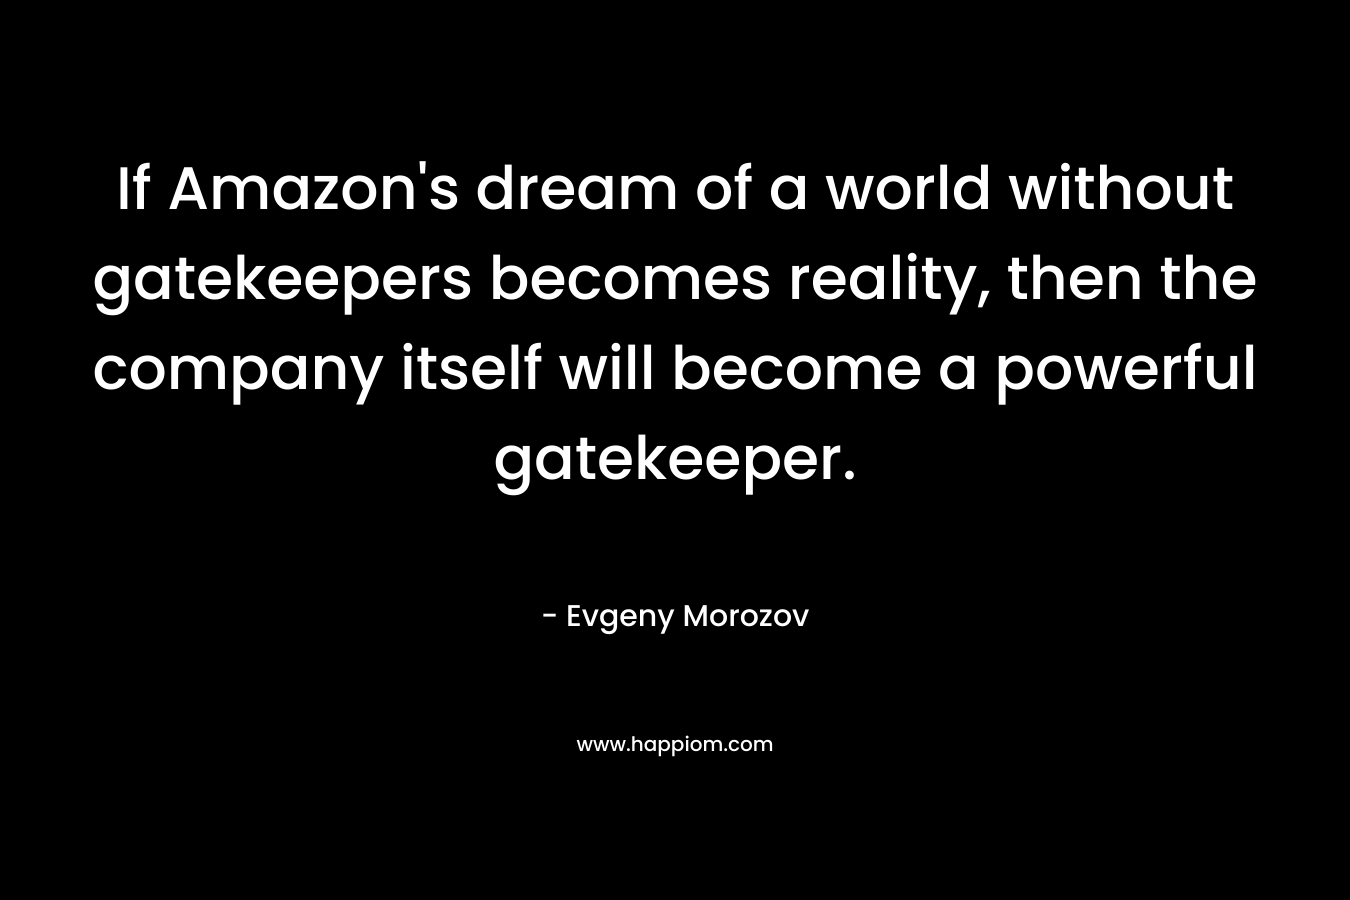 If Amazon's dream of a world without gatekeepers becomes reality, then the company itself will become a powerful gatekeeper.